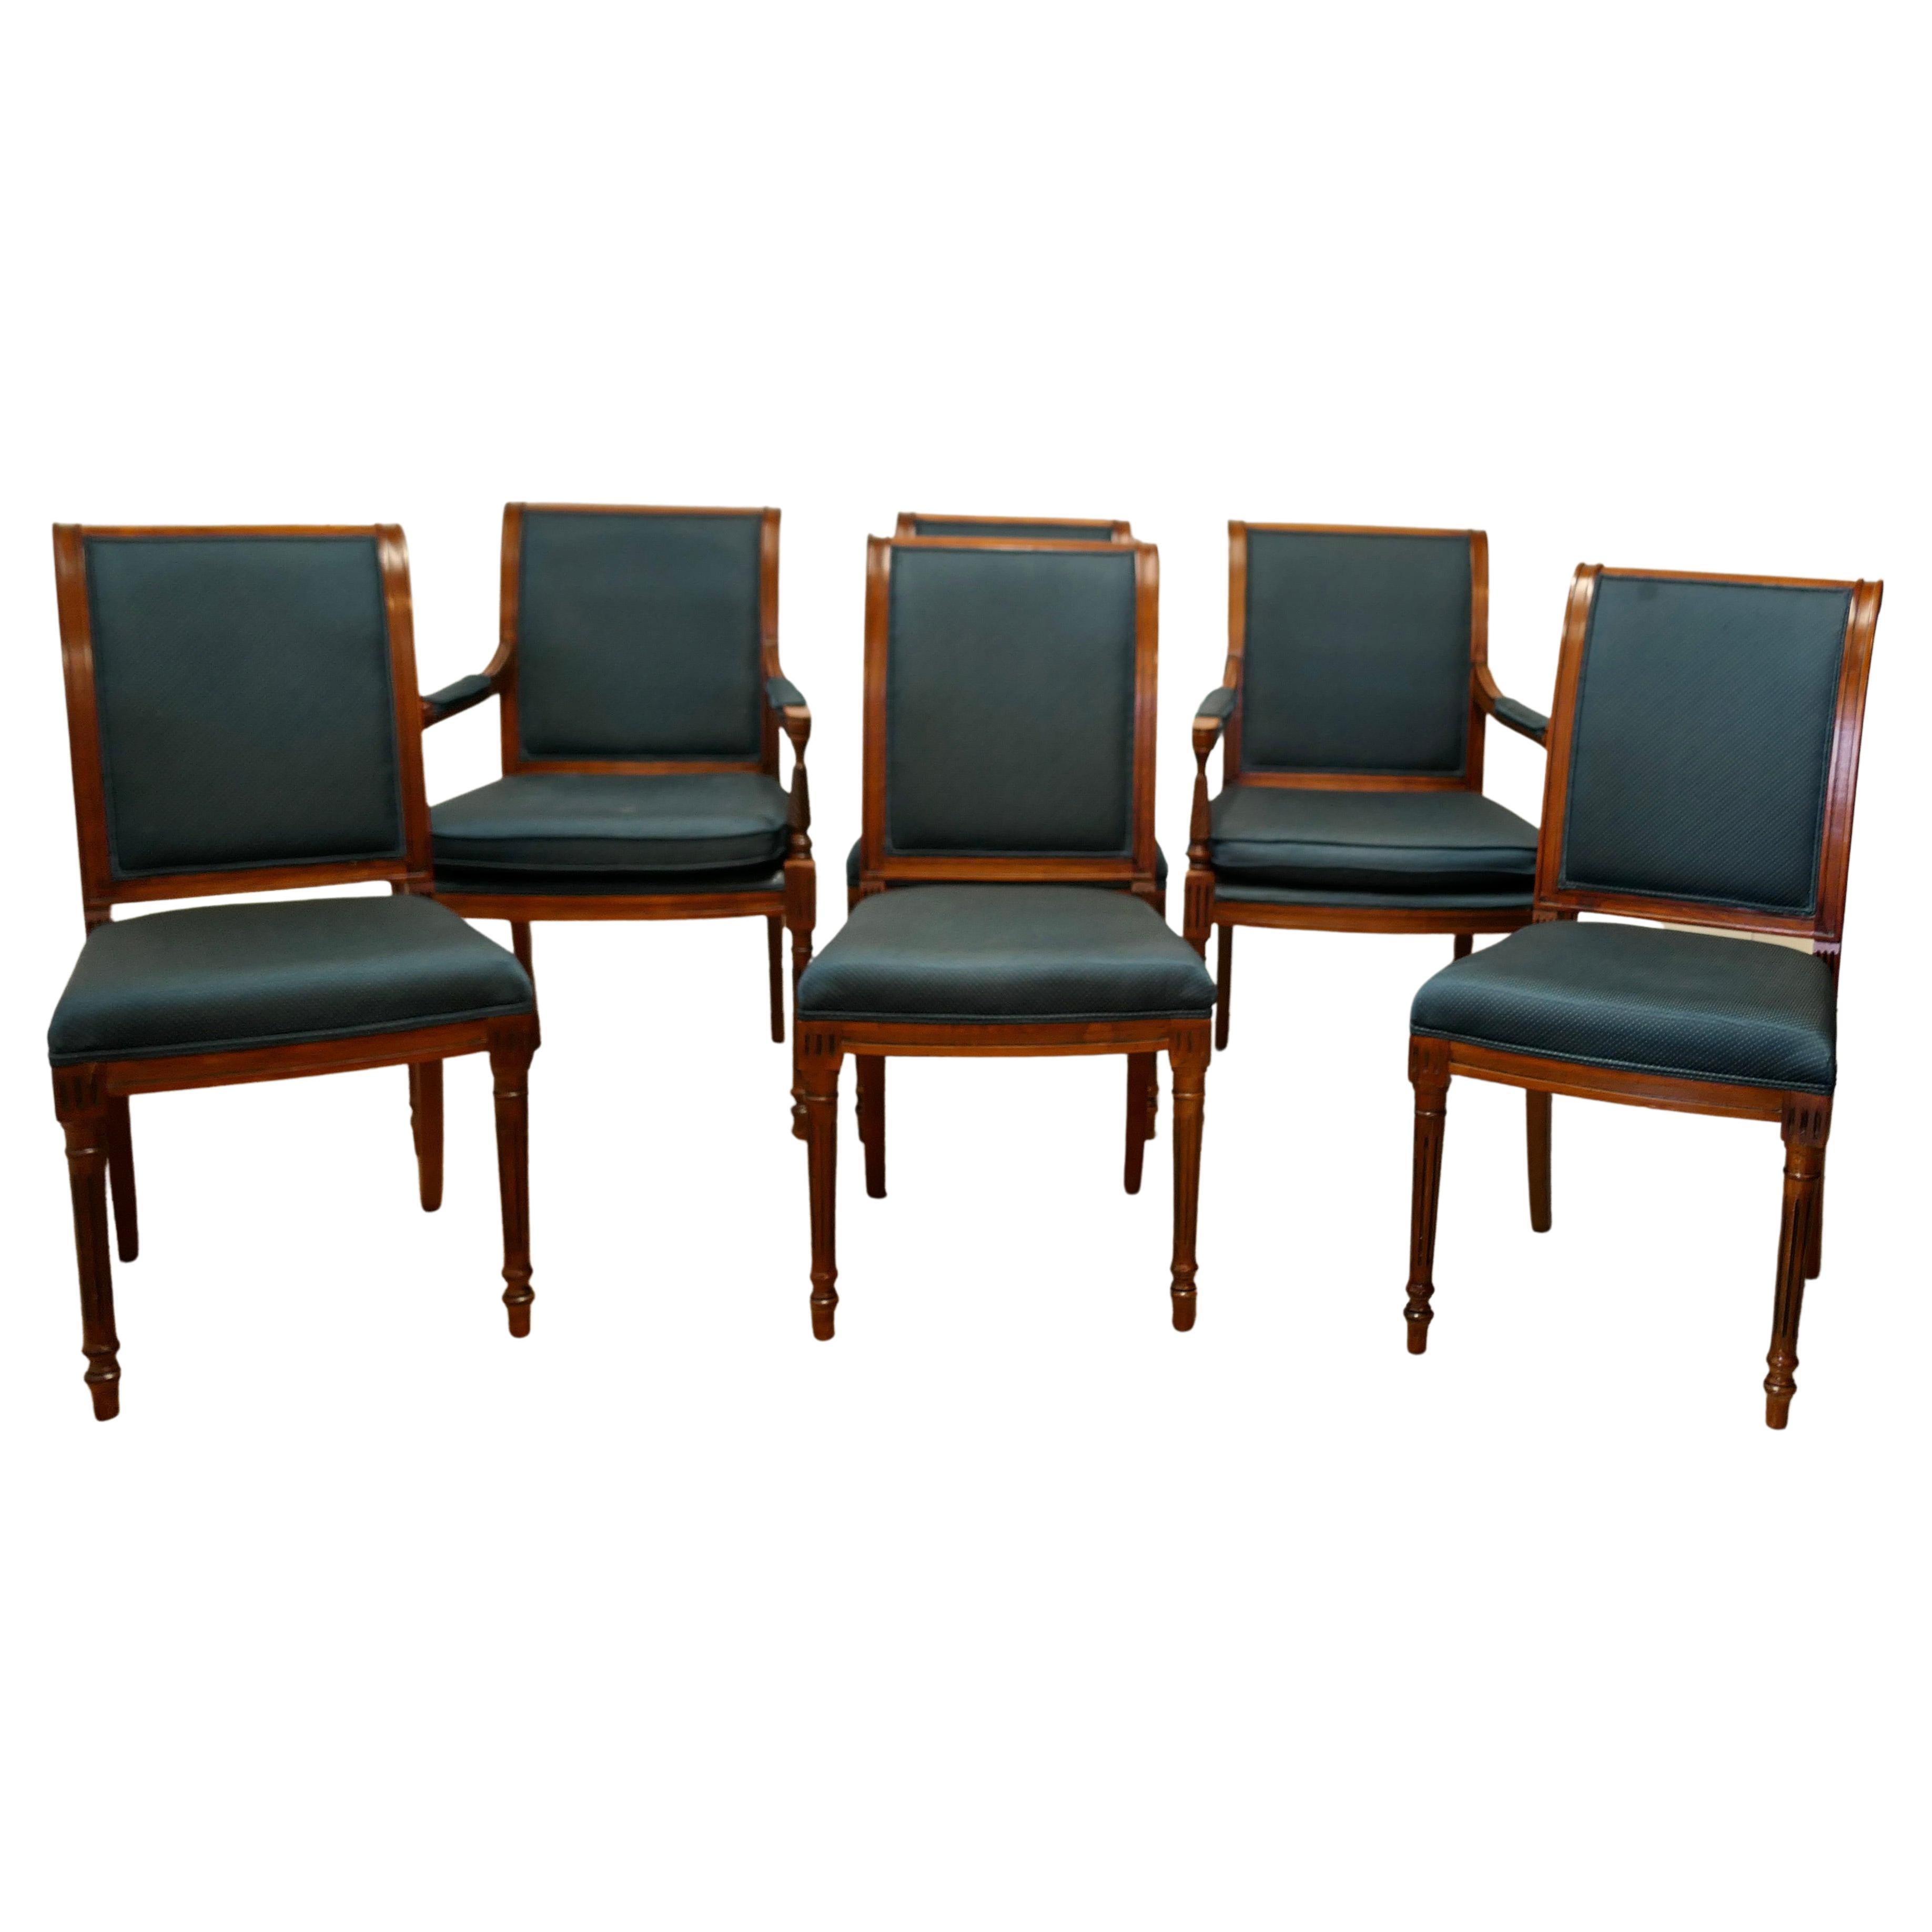 Set of 6 Midcentury Teak Dining Chairs in the Regency Style a Good Quality Set